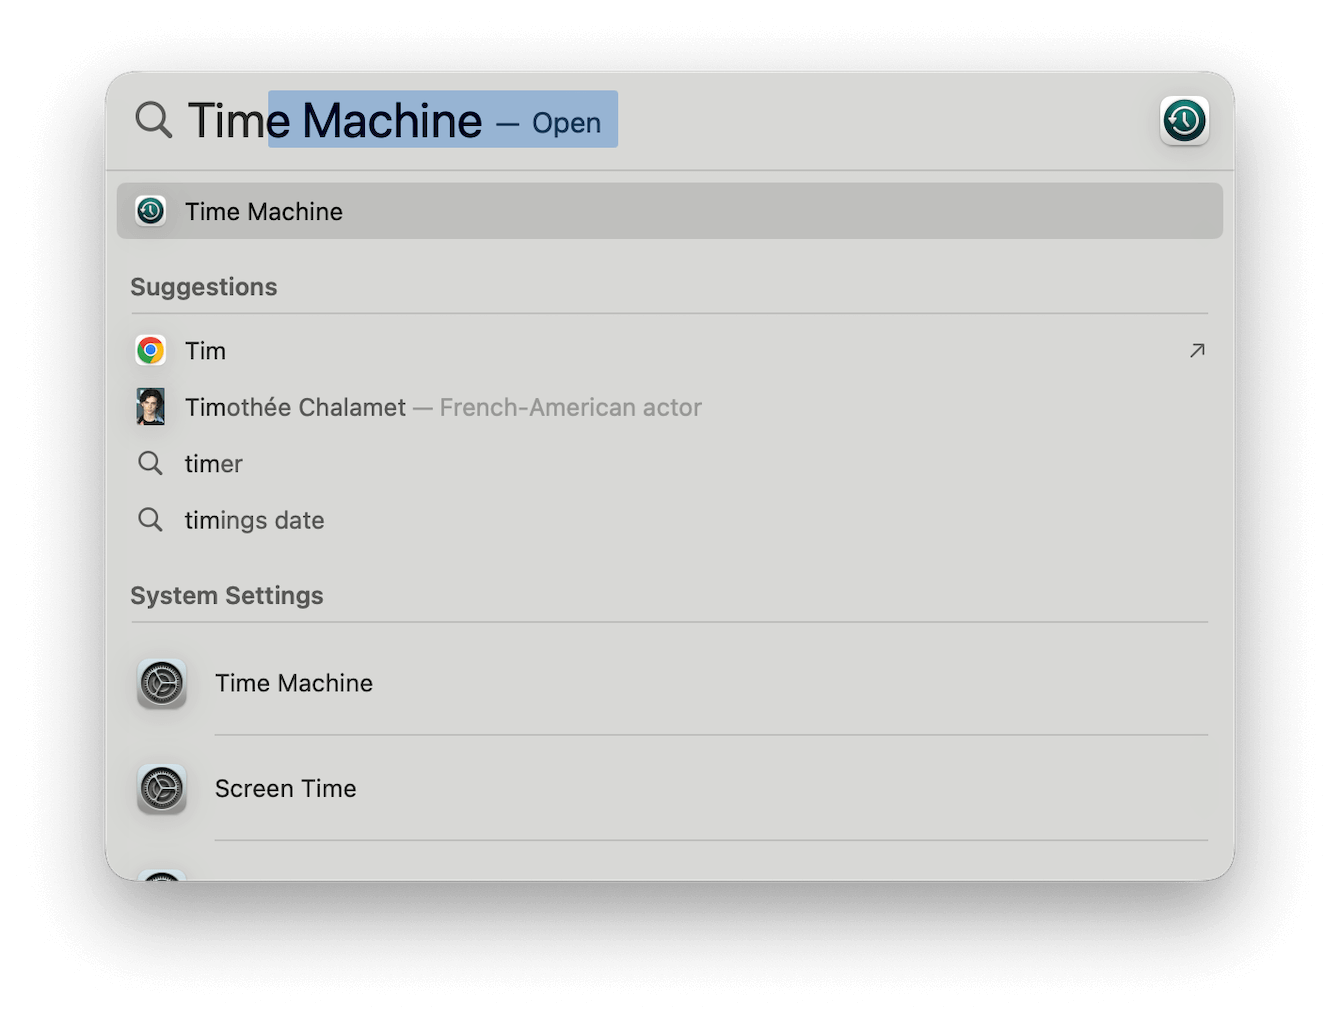 Open Time Machine from a Spotlight search